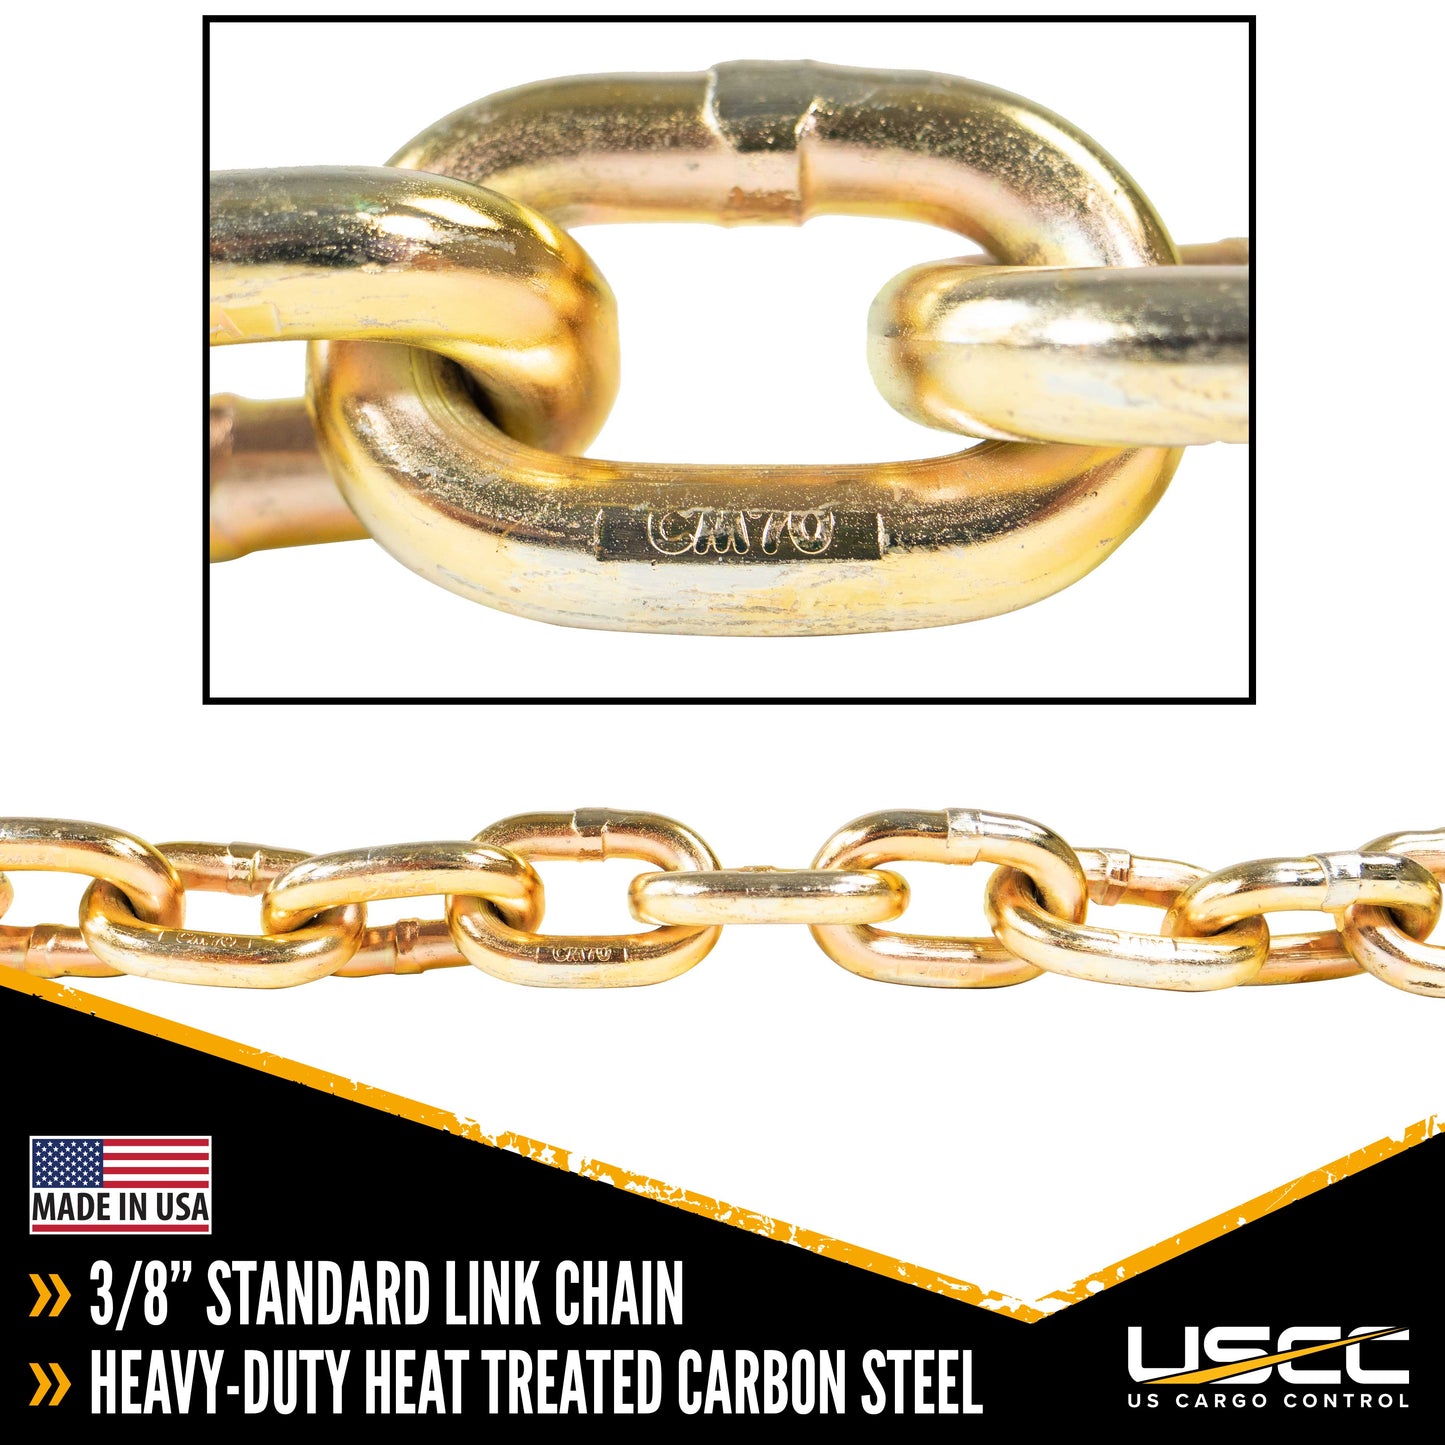 Grade 70 38 inch x 20 foot Chain Ratchet Chain Binder Made in USA Package image 4 of 8